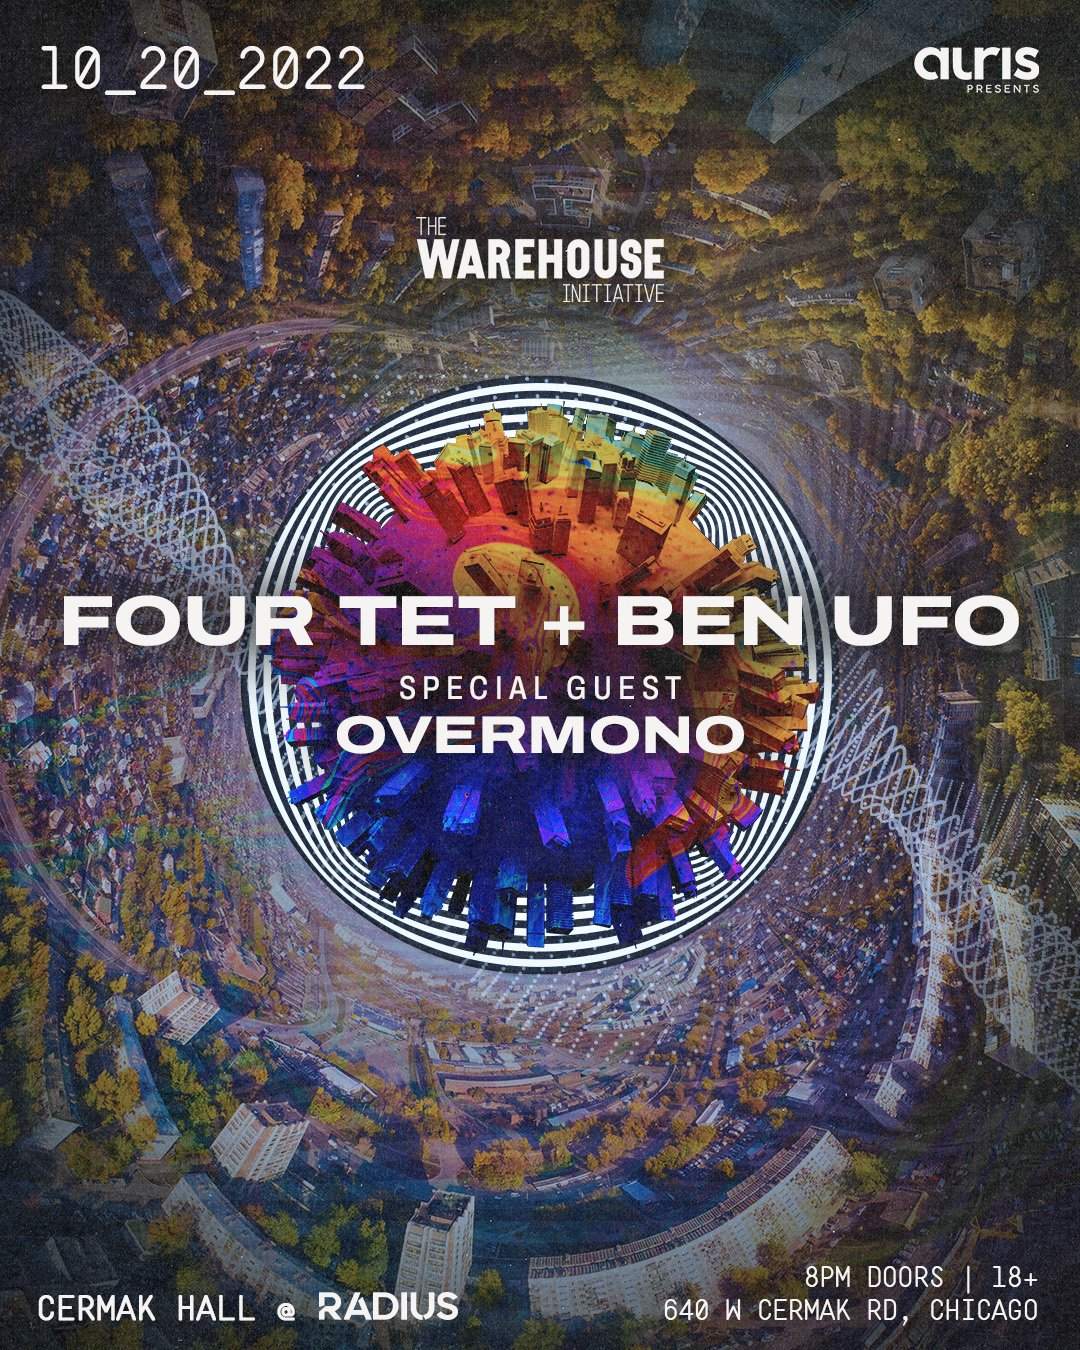 The Warehouse Initiative at Cermak Hall: Four Tet + Ben UFO, Overmono - Página frontal